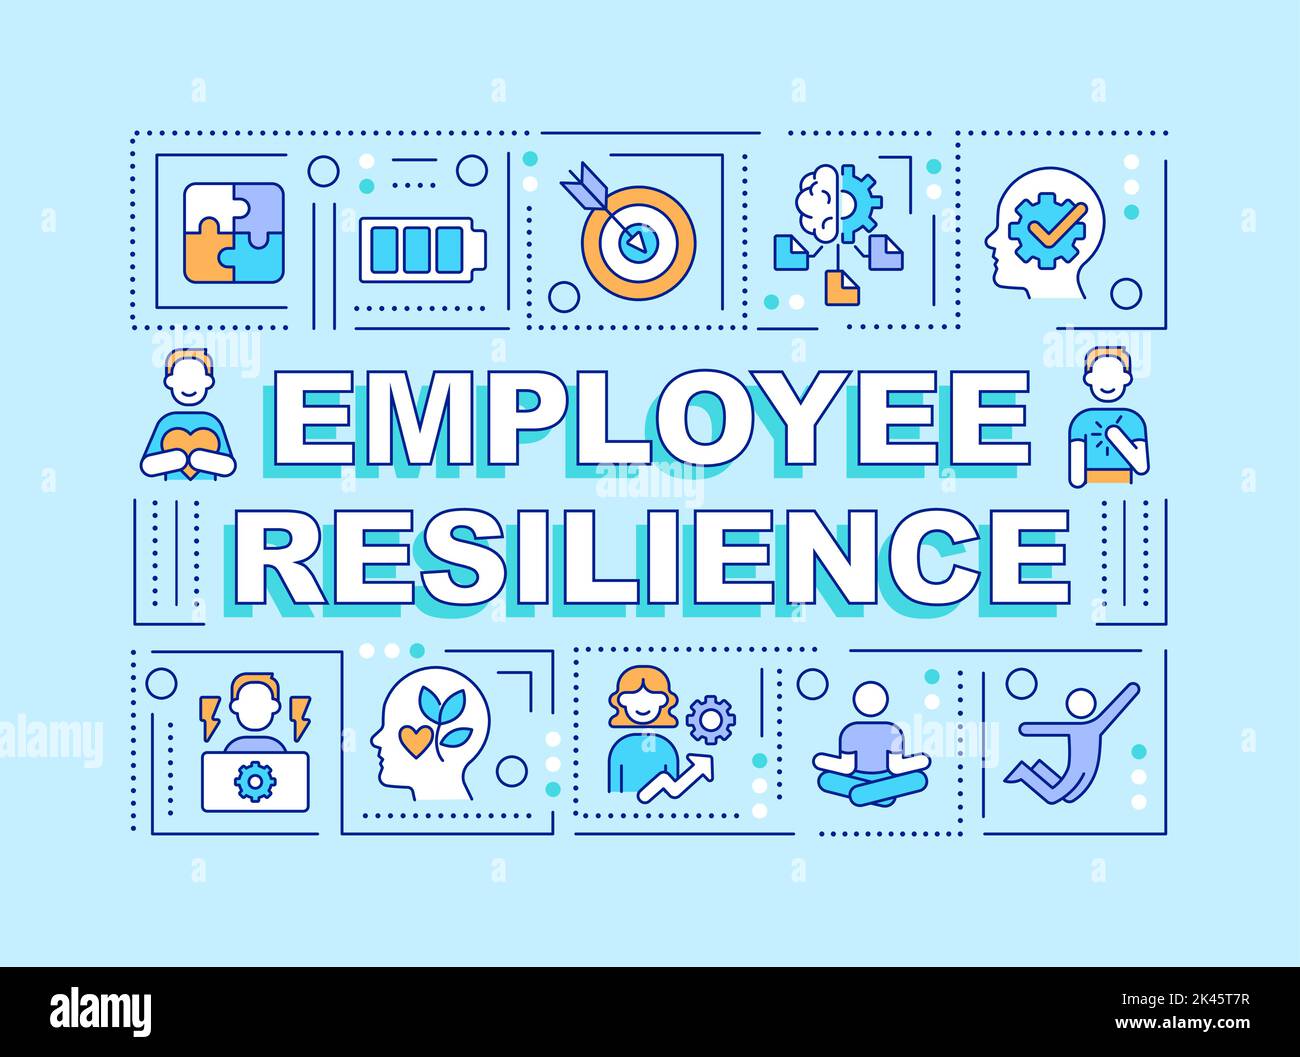 Employee resilience word concepts blue banner Stock Vector